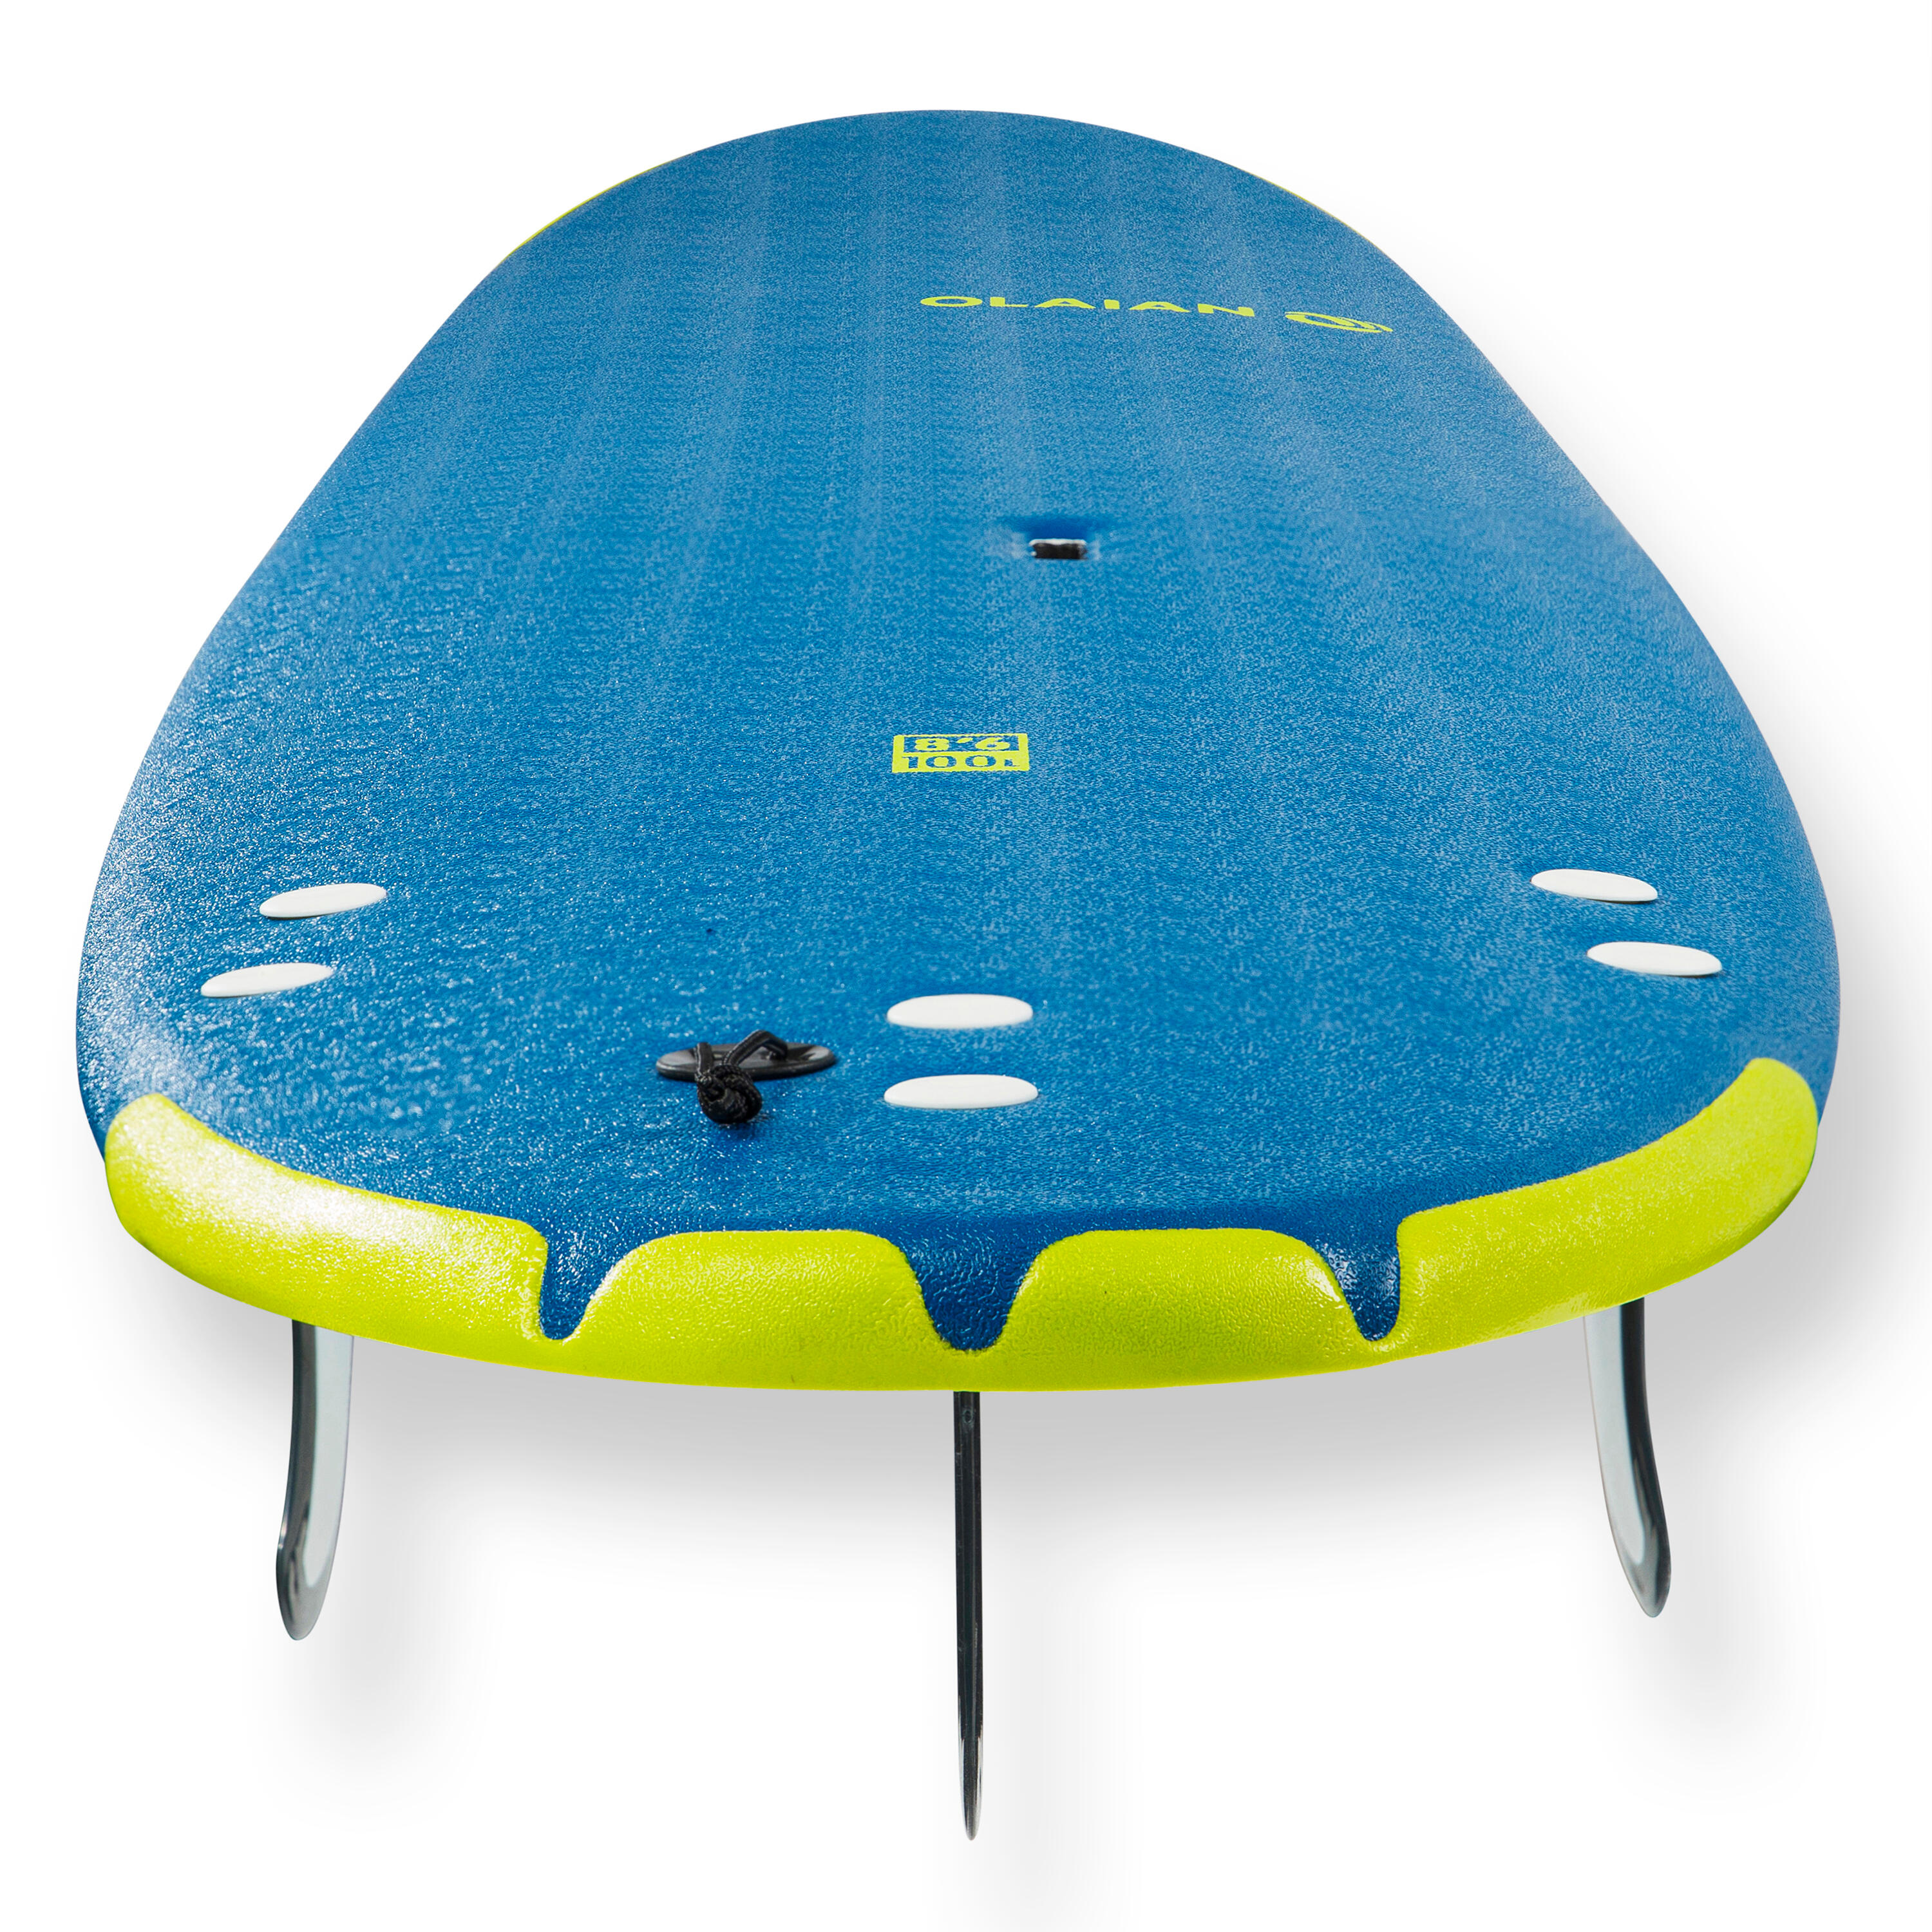 500 Foam Surfboard 8'6”. Supplied with a leash and 3 fins. 4/13